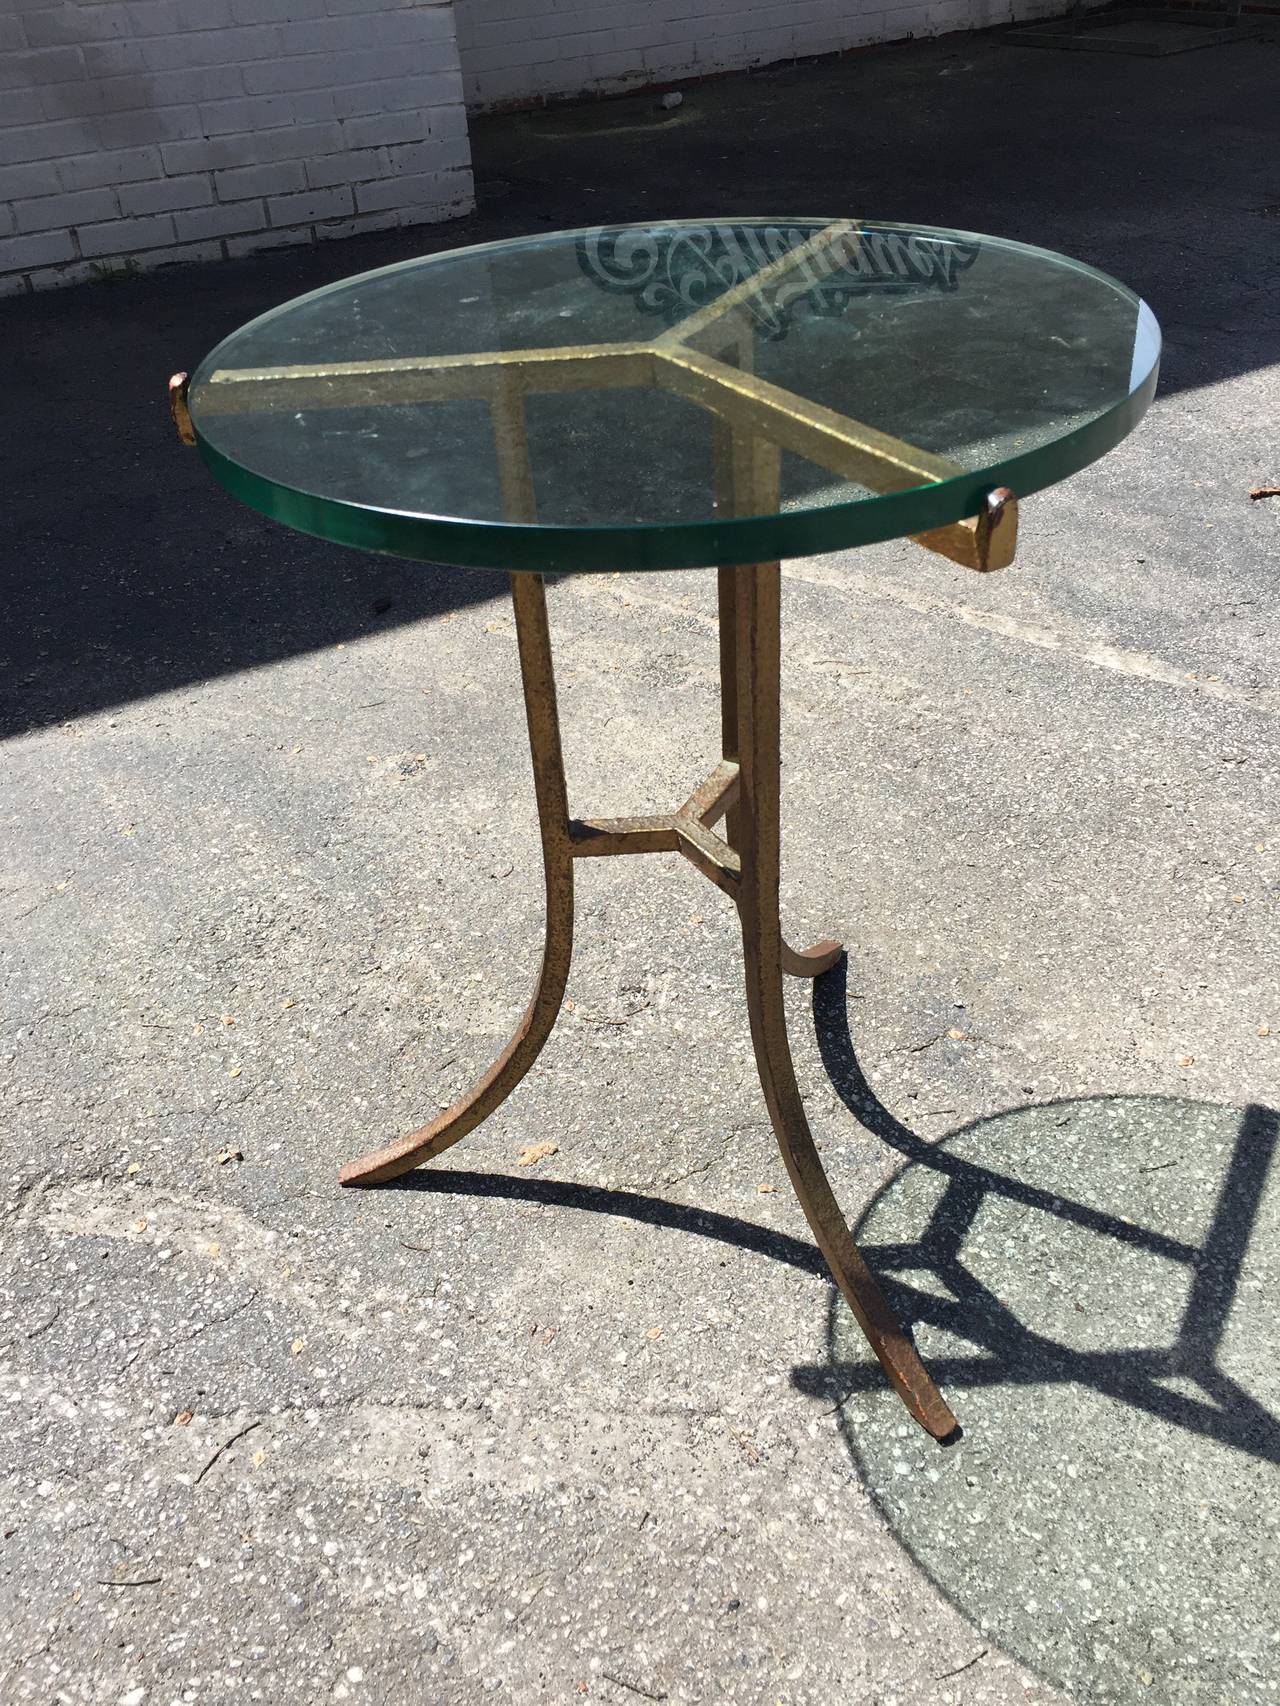 Exceptional Mid-Century sculptural glass top occasional table. This interesting piece is comprised of a heavy iron base with gold rough surface painted finish and thick 1